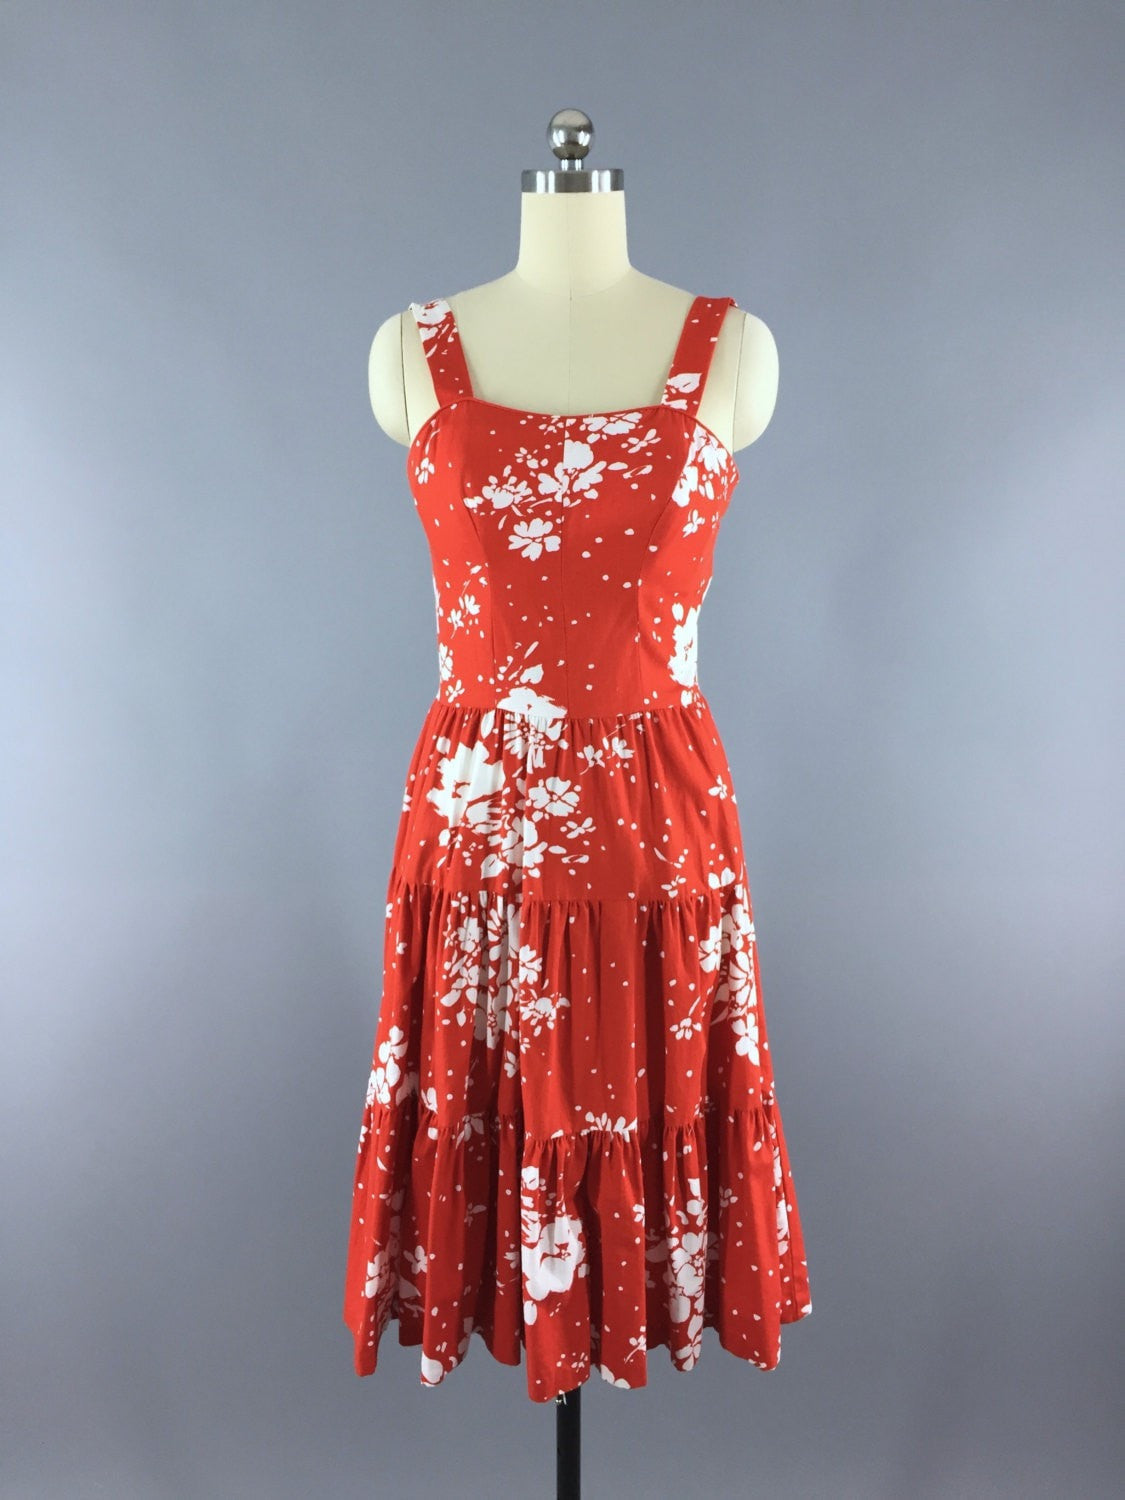 Vintage 1970s Dress / Red Floral Print - ThisBlueBird